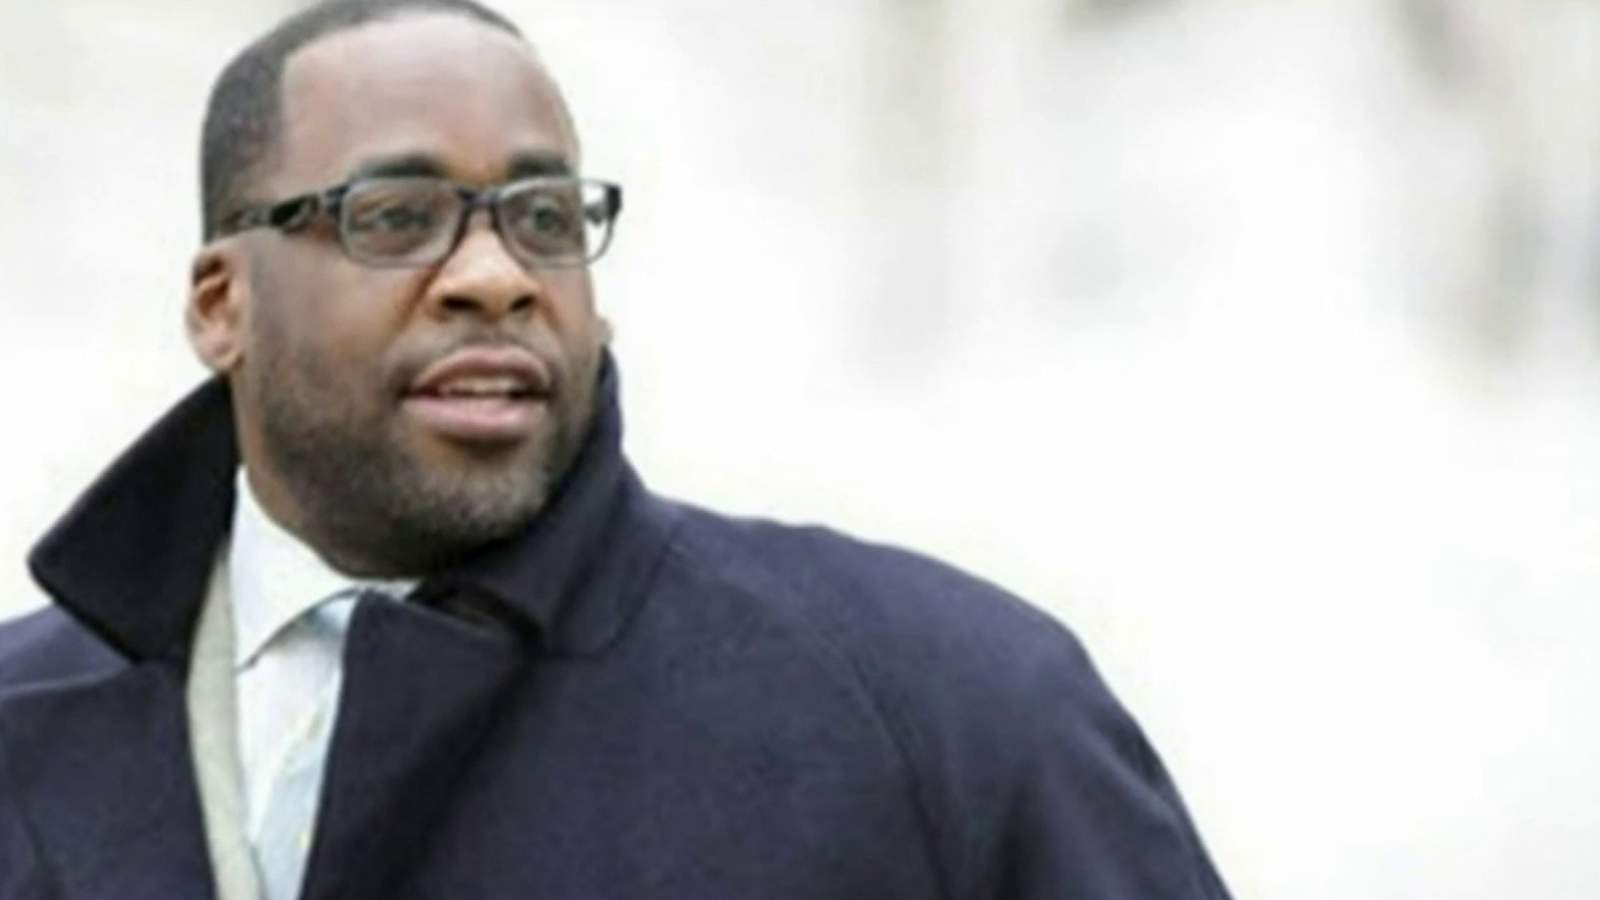 Kwame Kilpatrick reunites with family after release from prison